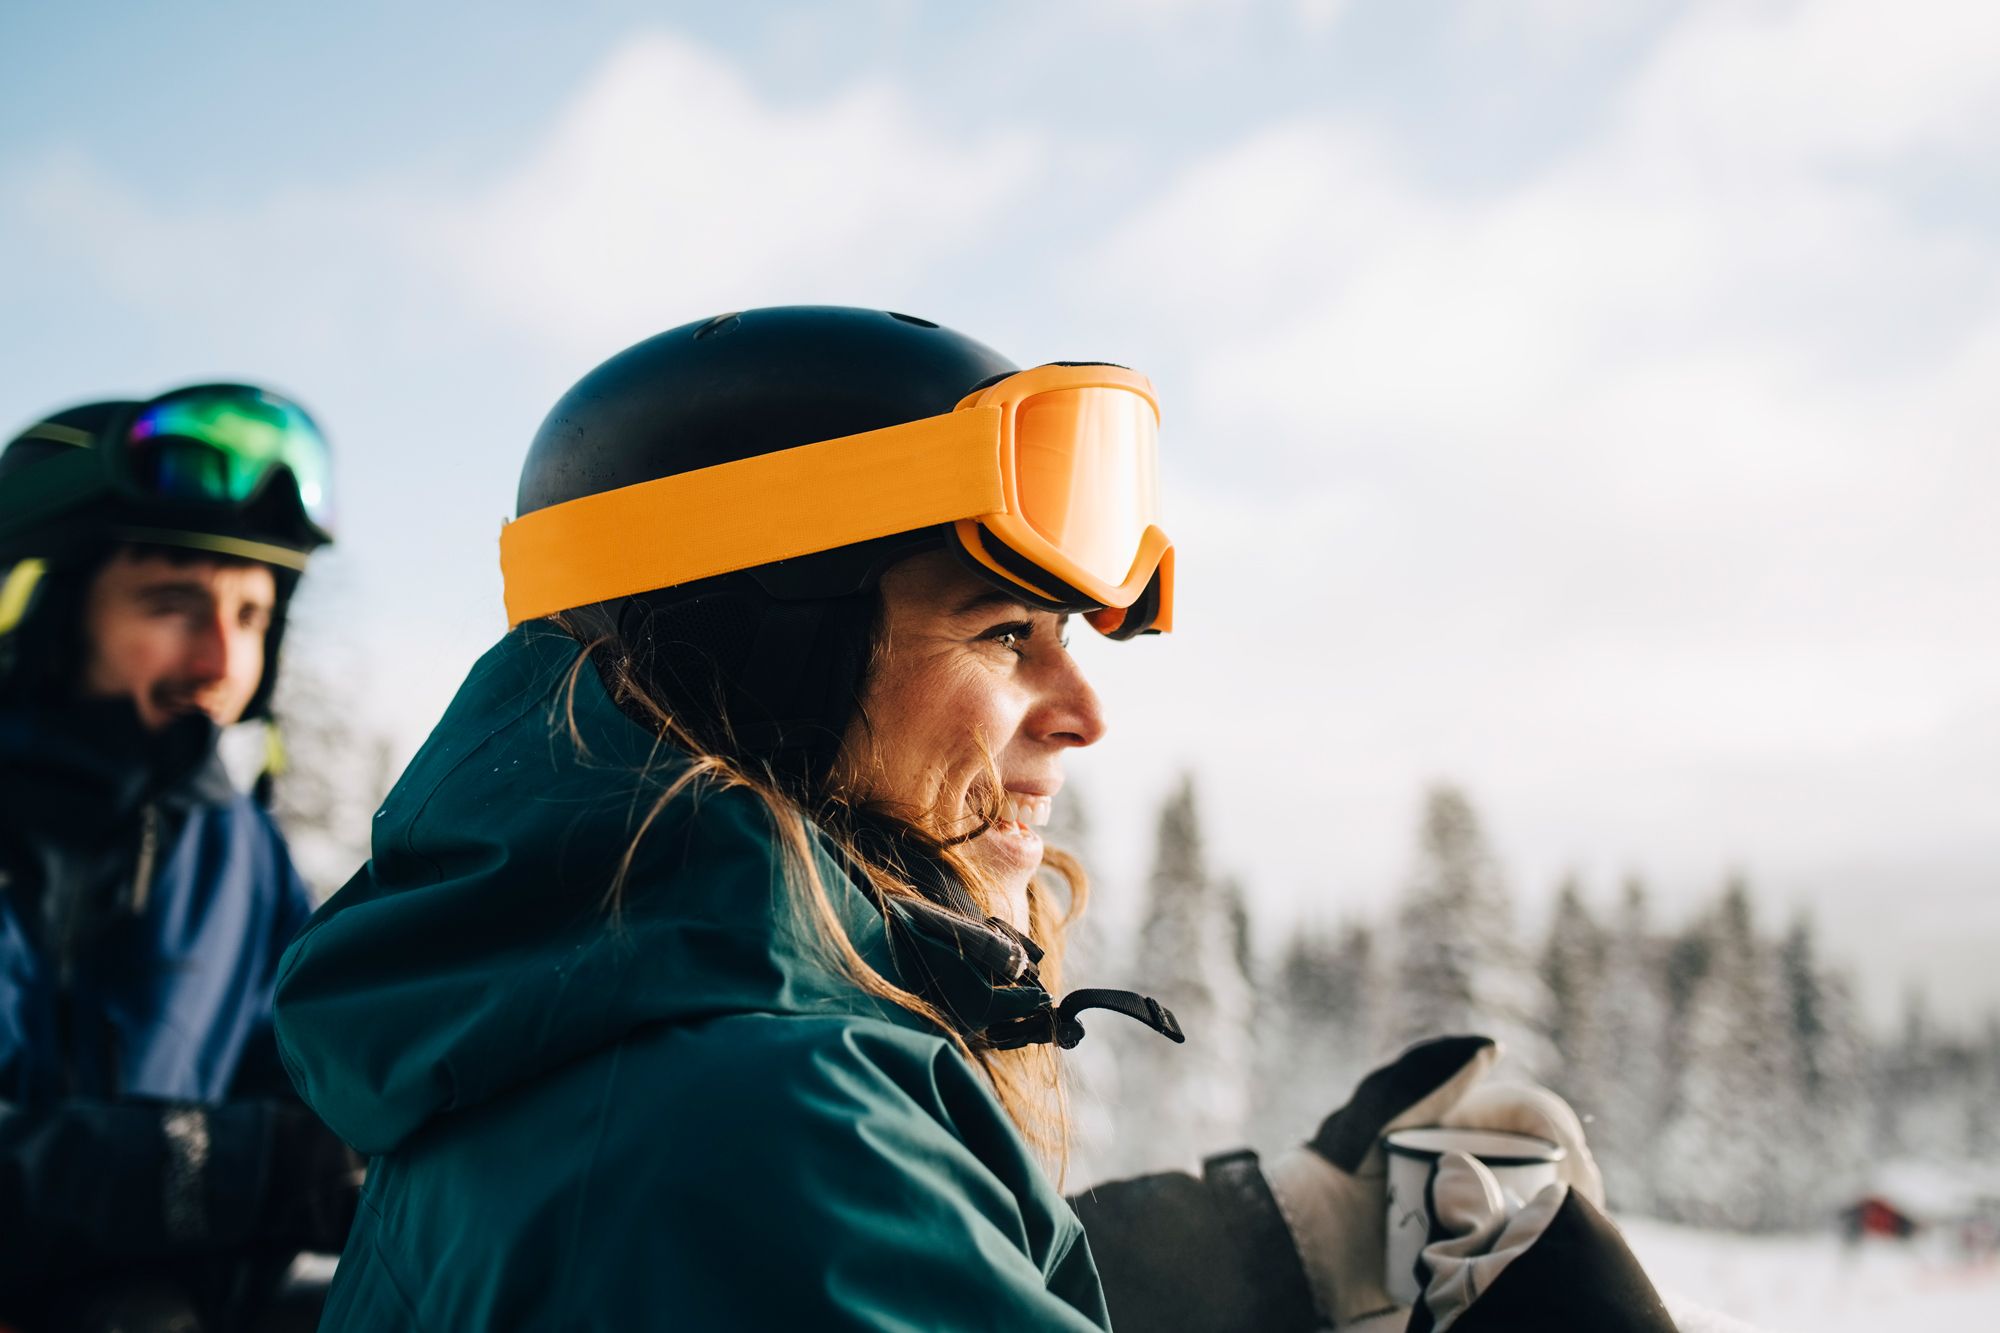 man and woman wearing ski helmets and goggles